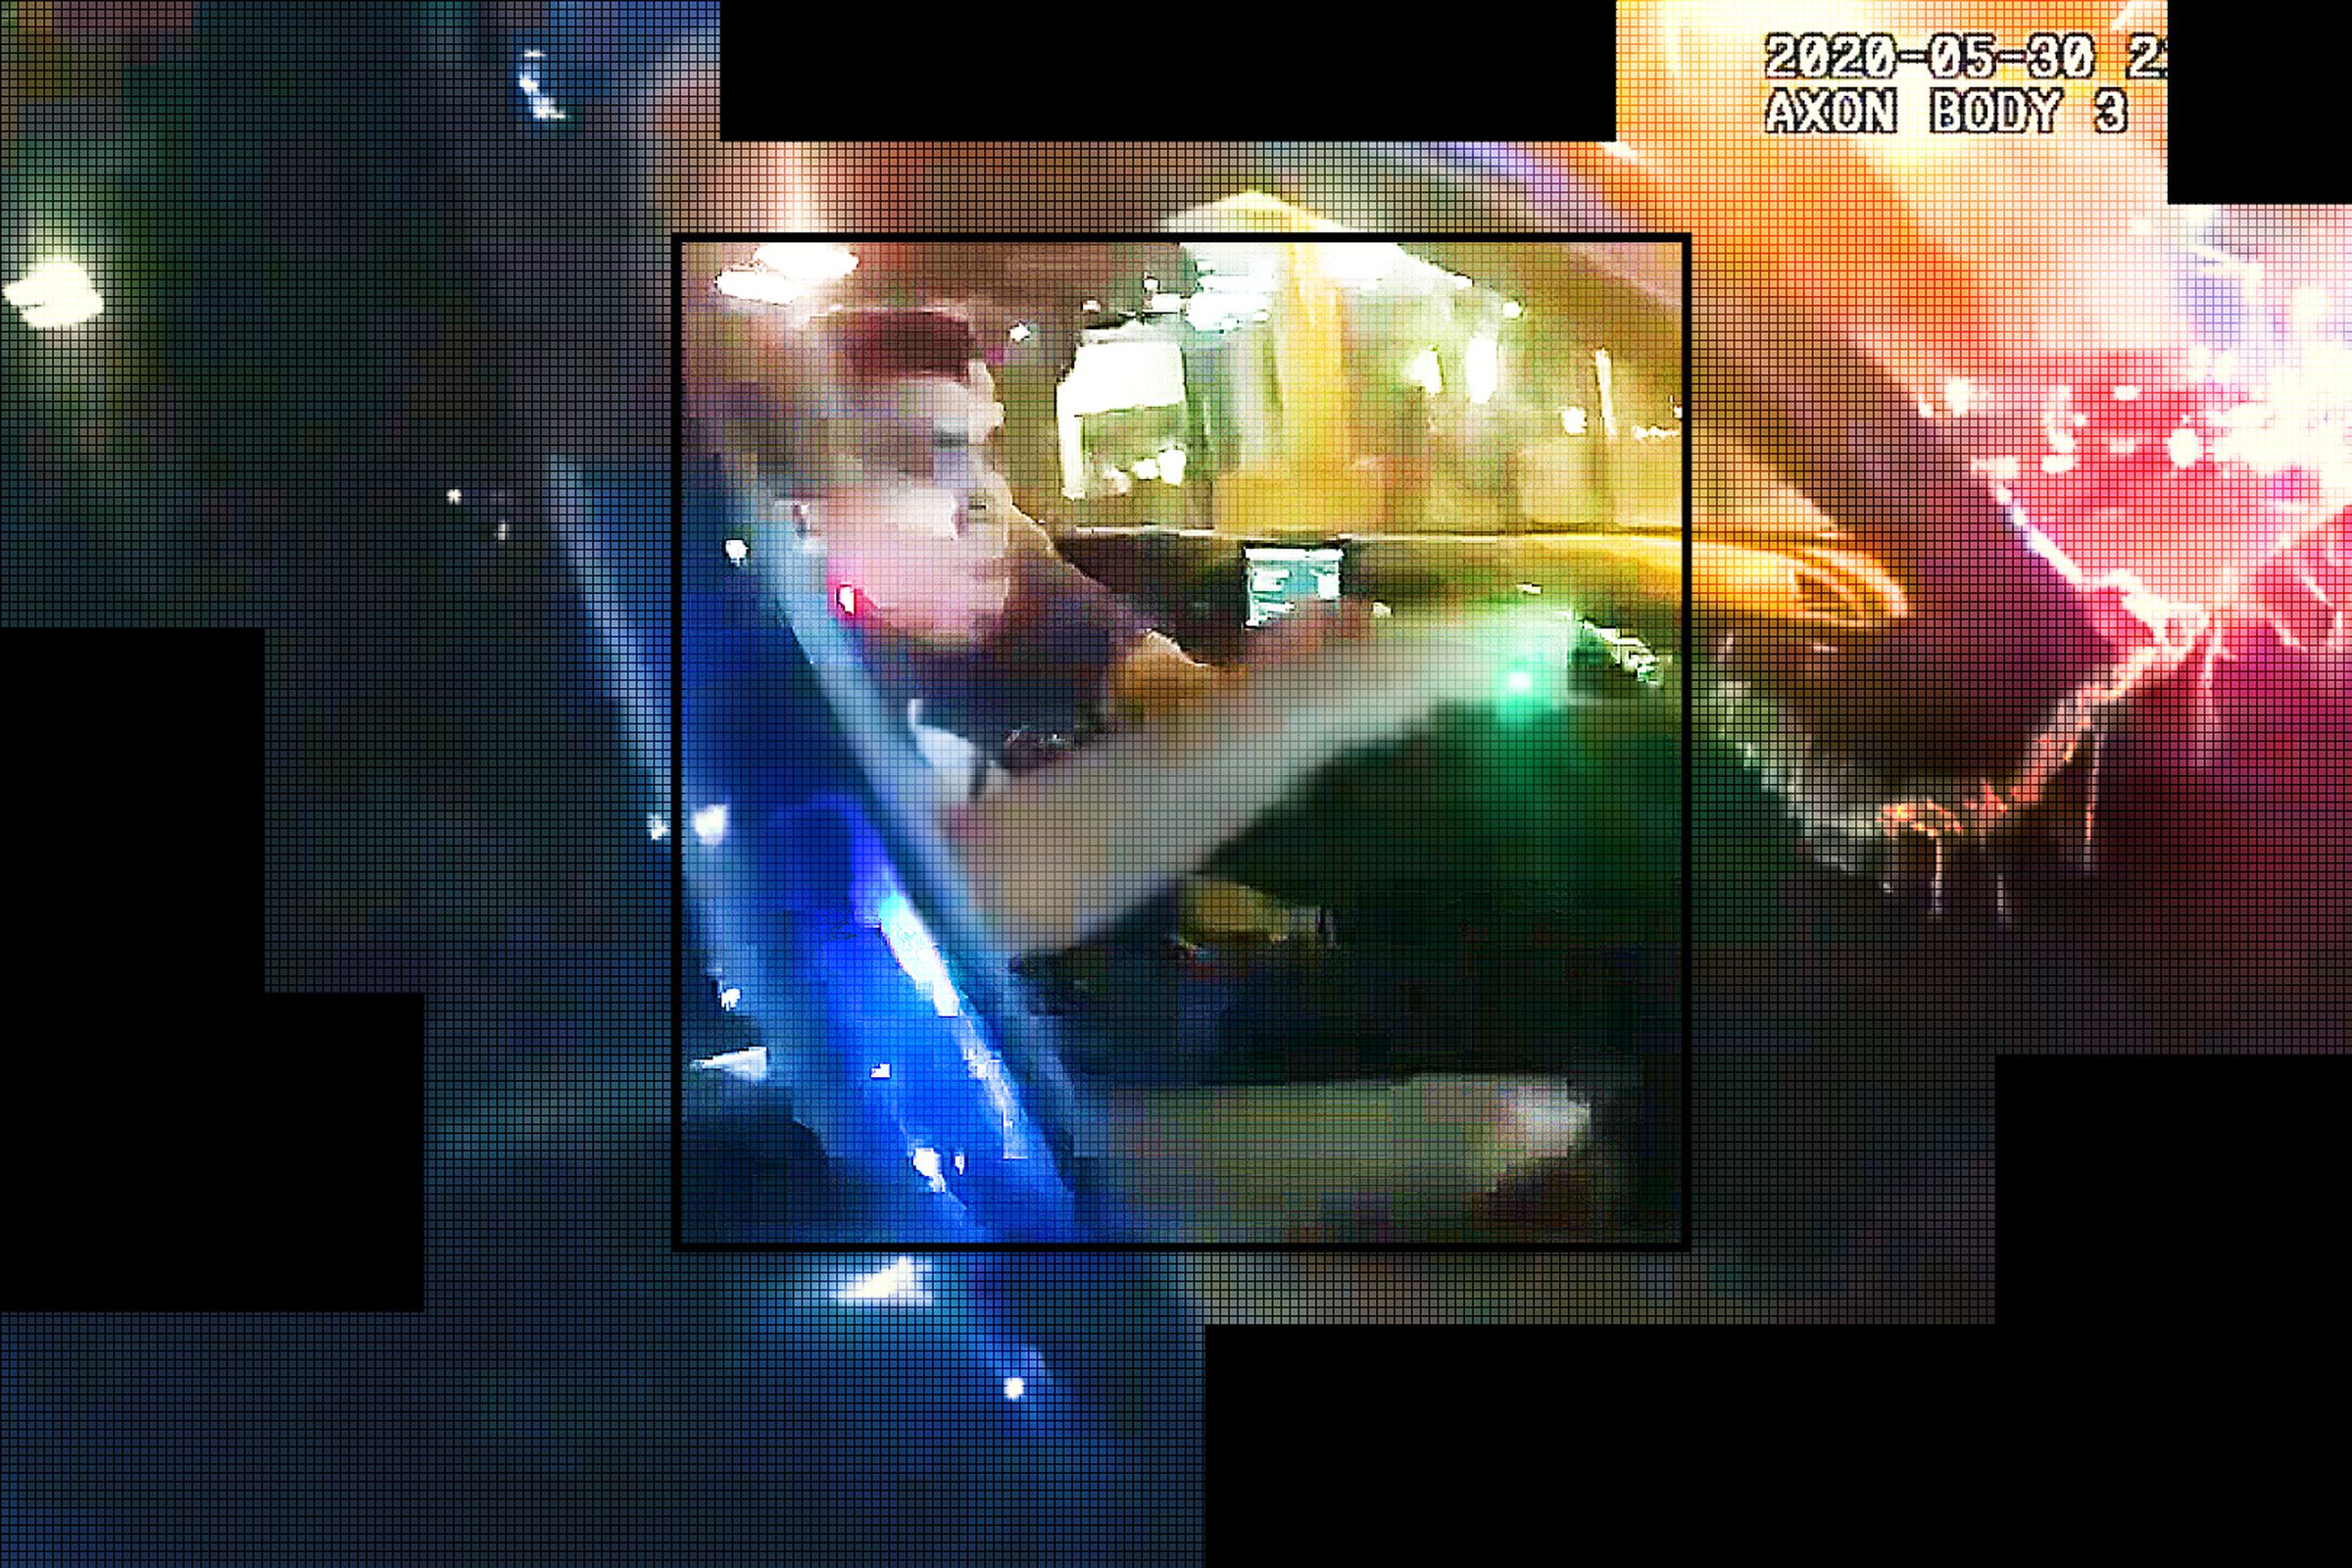 In a still from a police body camera videoclip, we see a man being pulled from a car.